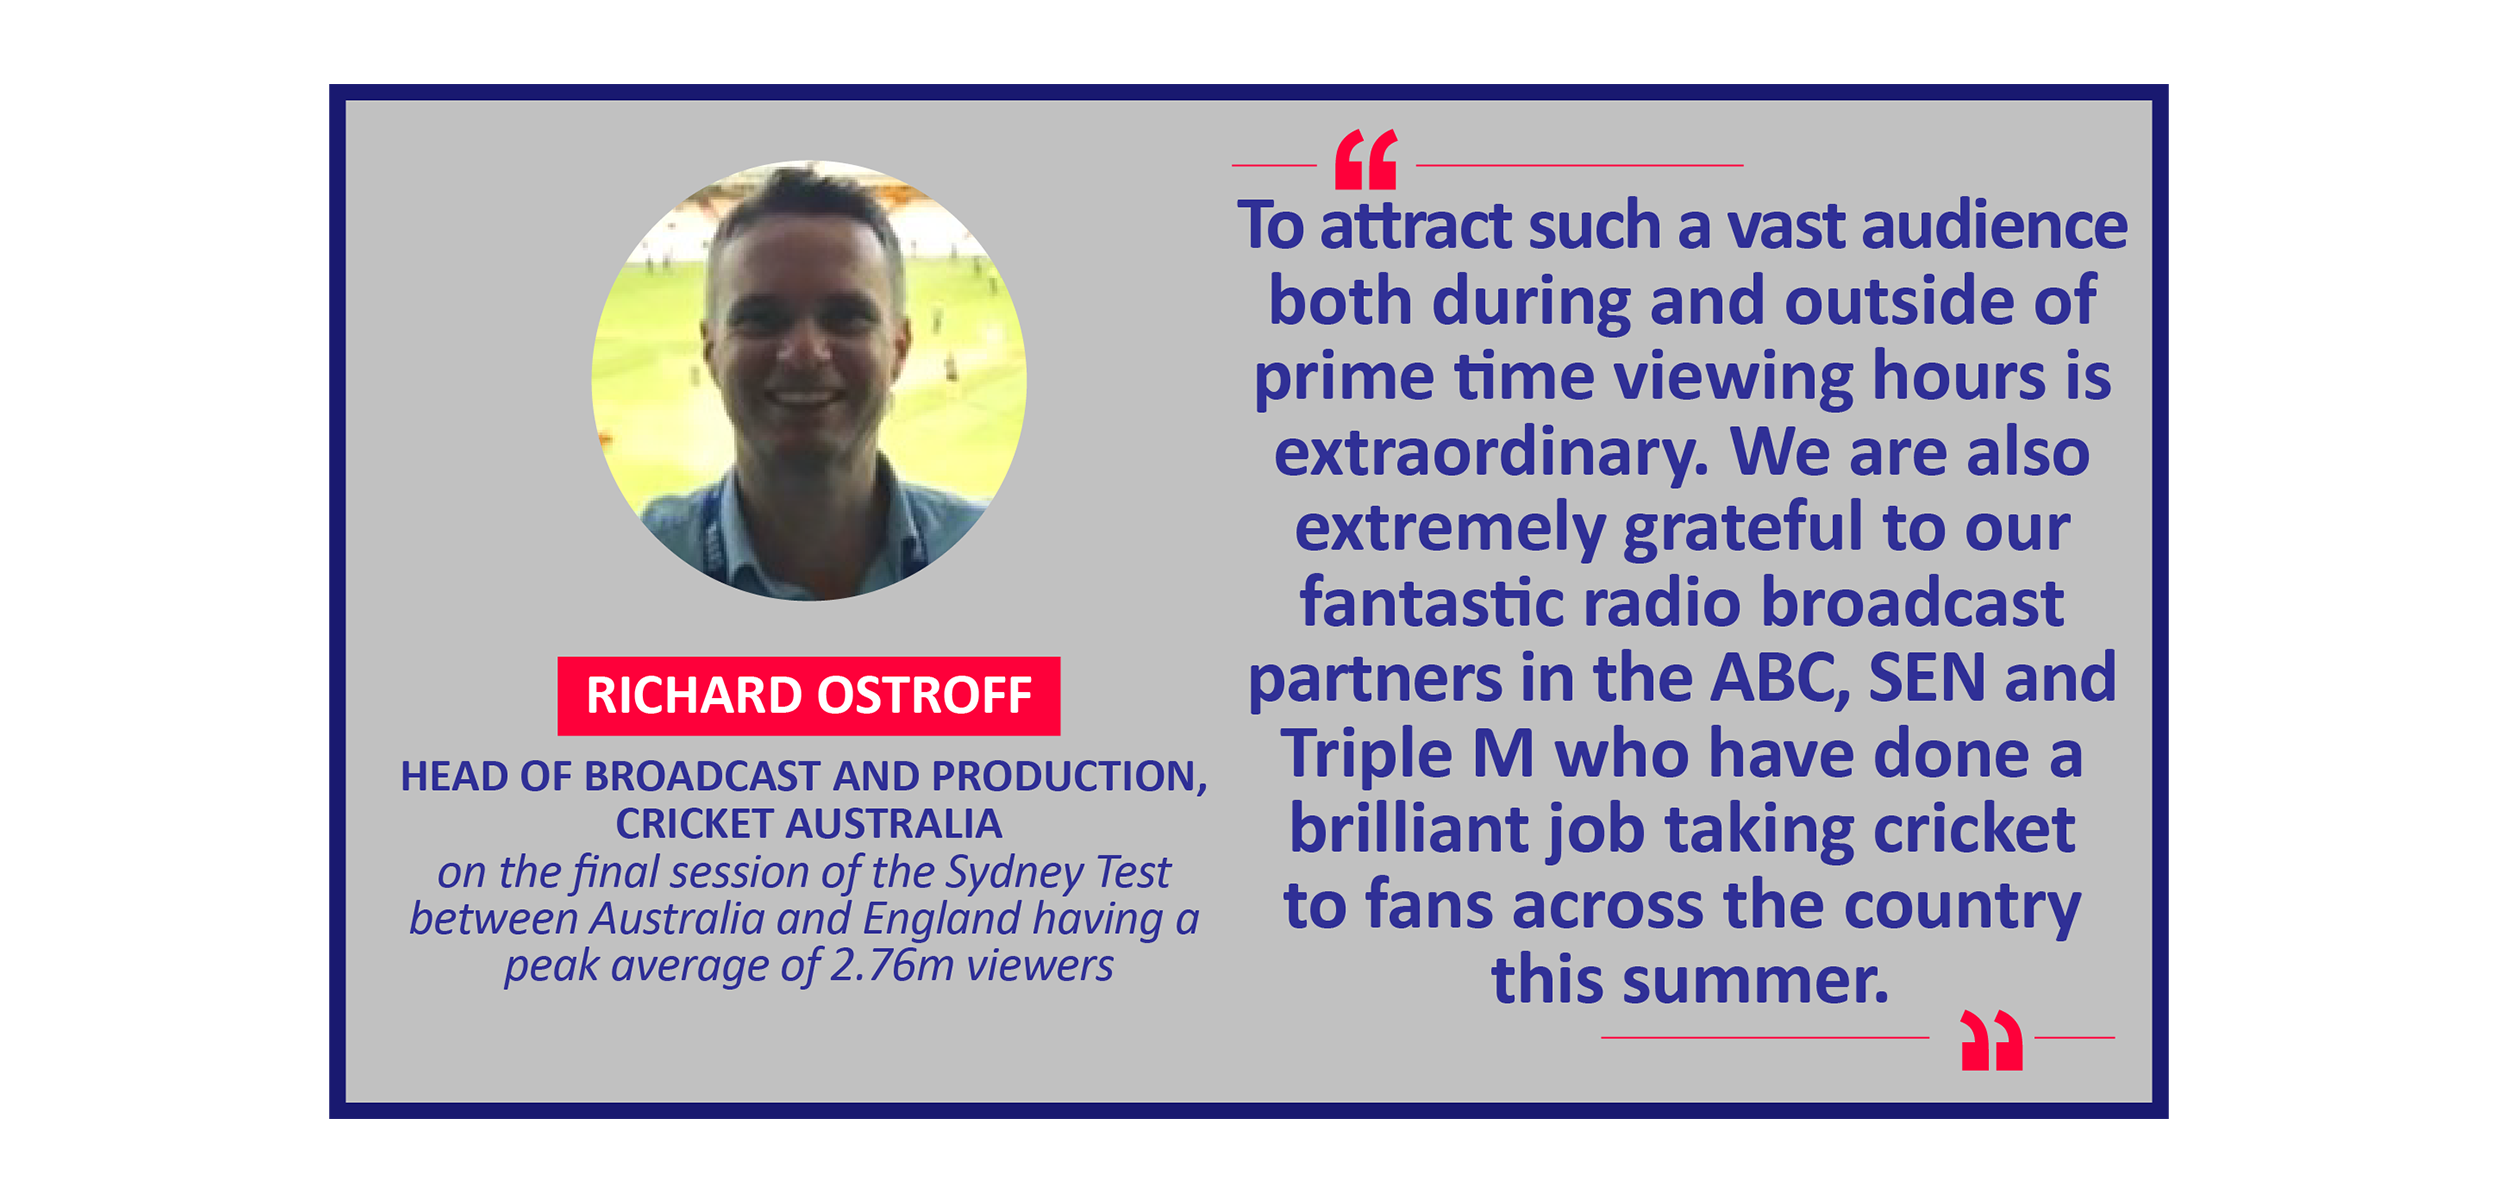 Richard Ostroff, Head of Broadcast and Production, Cricket Australia on the final session of the Sydney Test between Australia and England having a peak average of 2.76m viewers